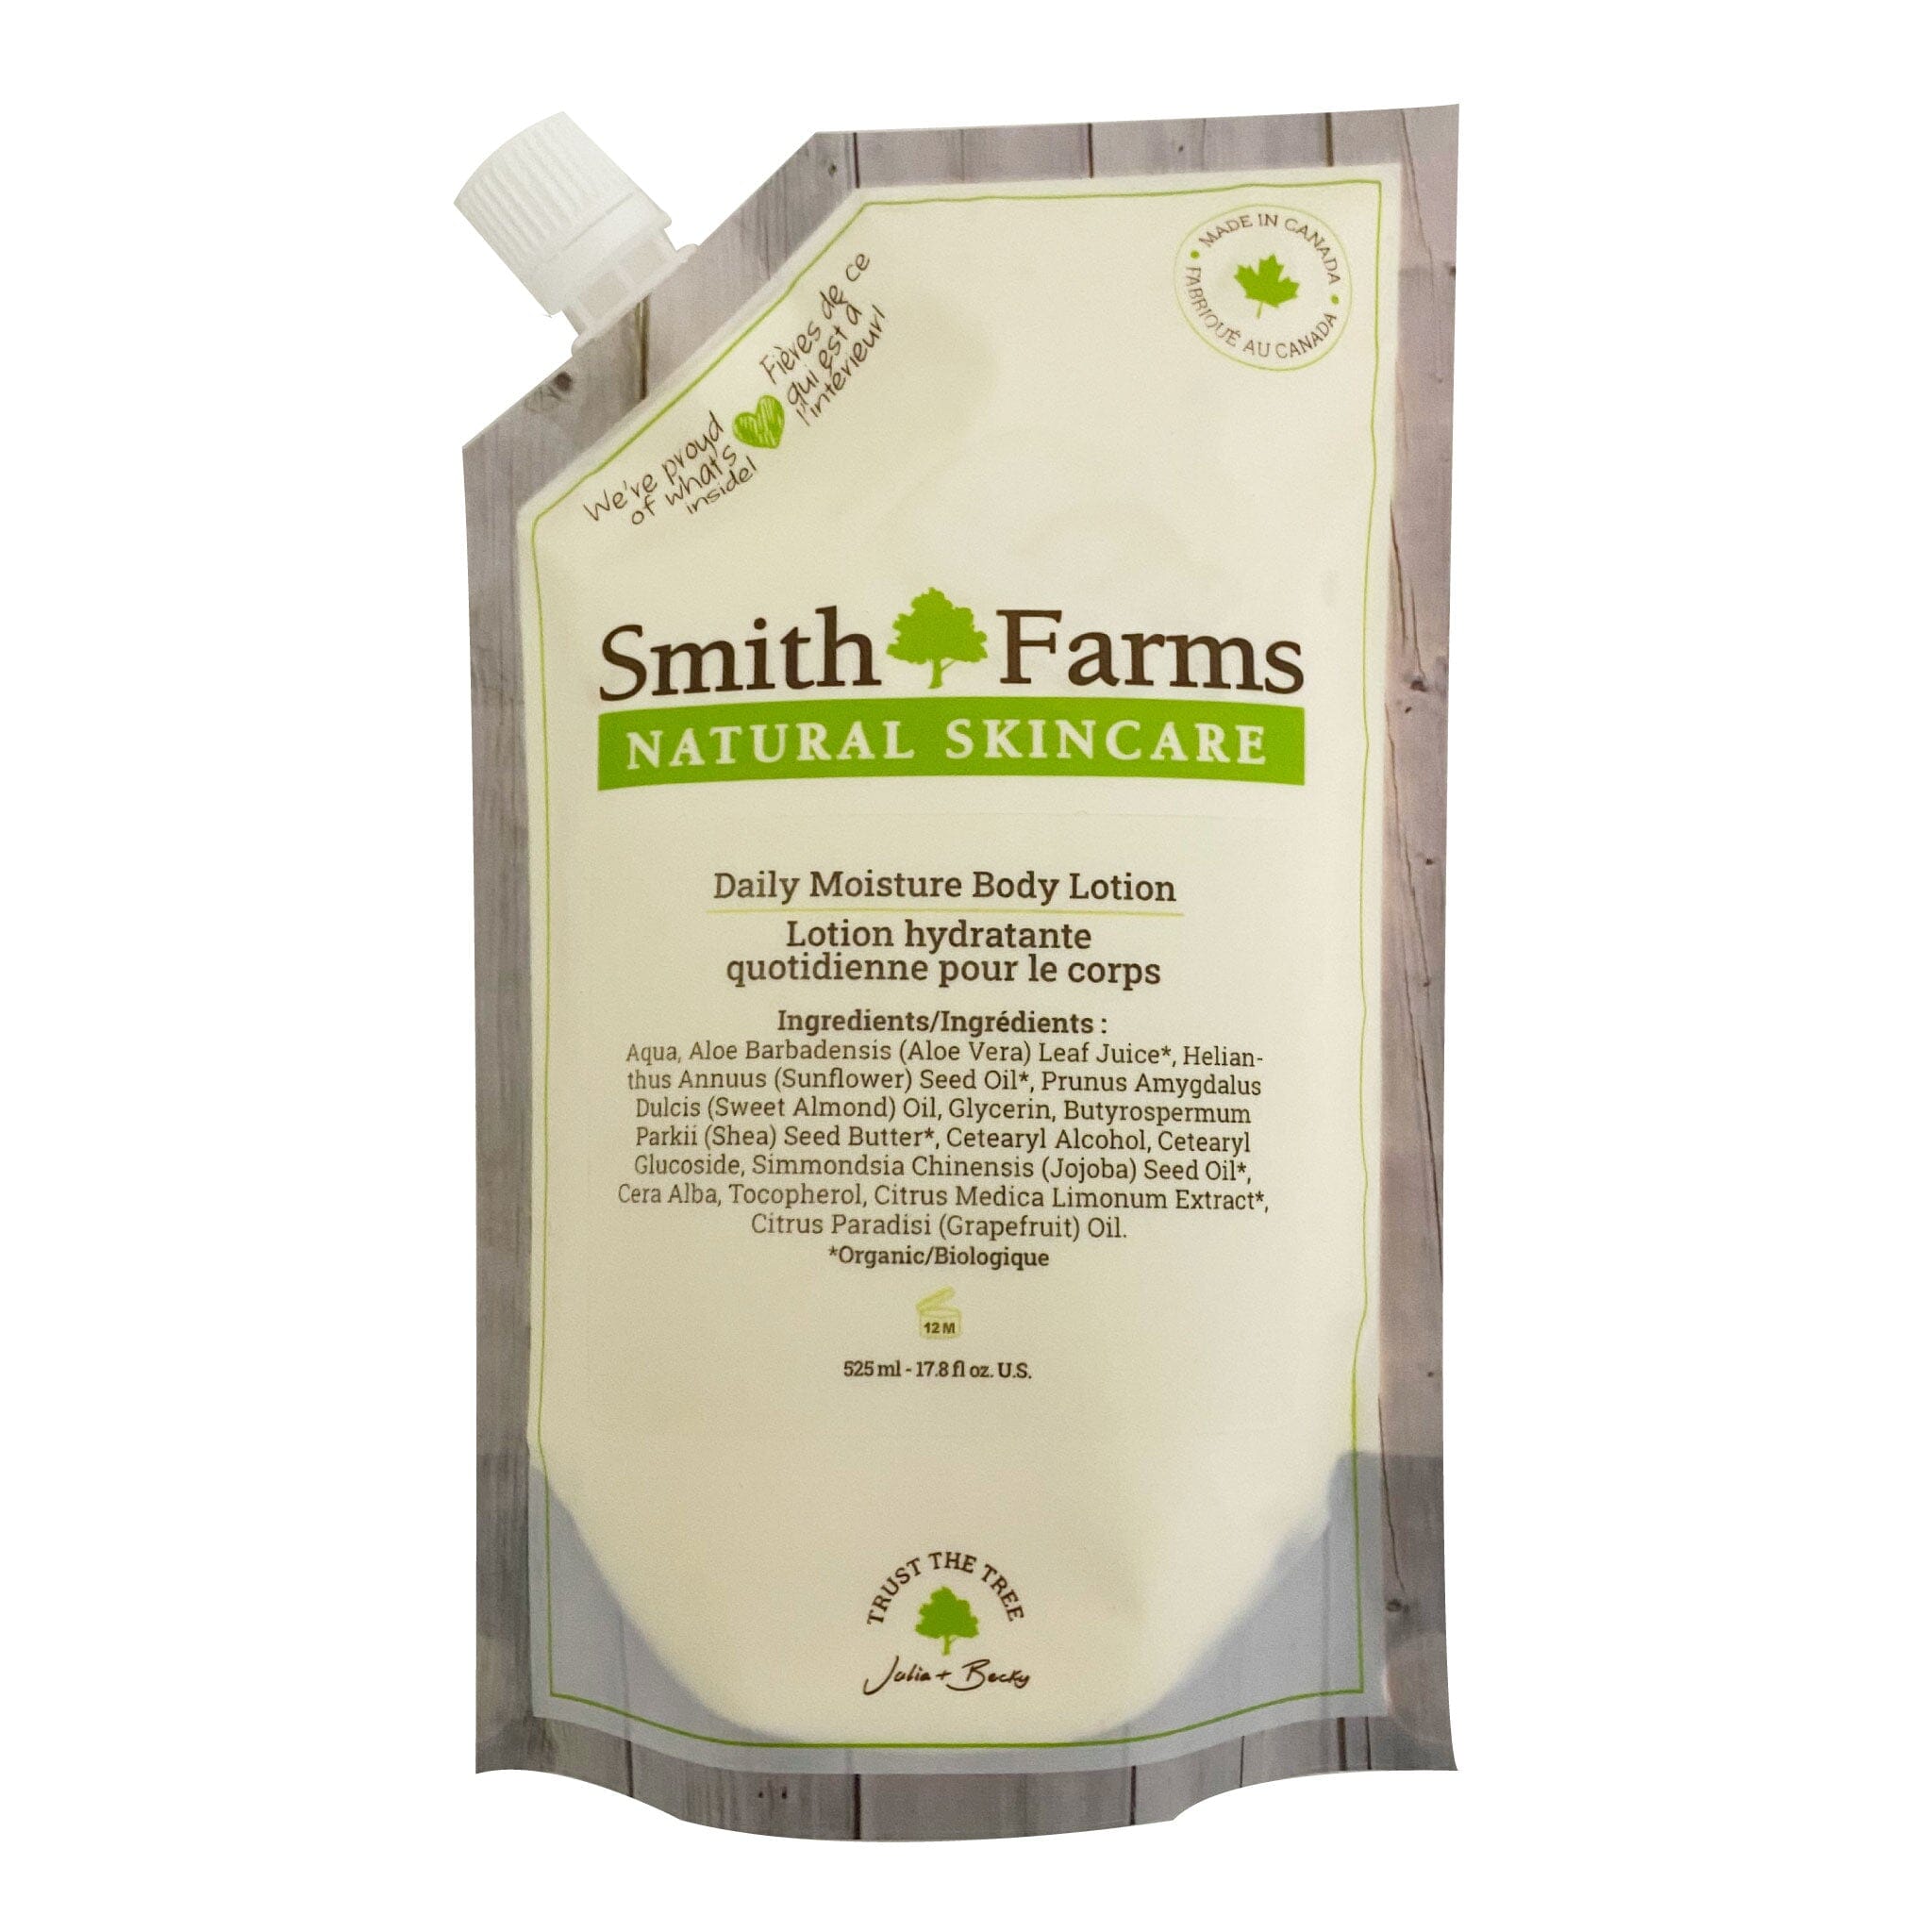 Daily Moisture Body Lotion Body Care,Our Products Smith Farms 525 ml (refill) 